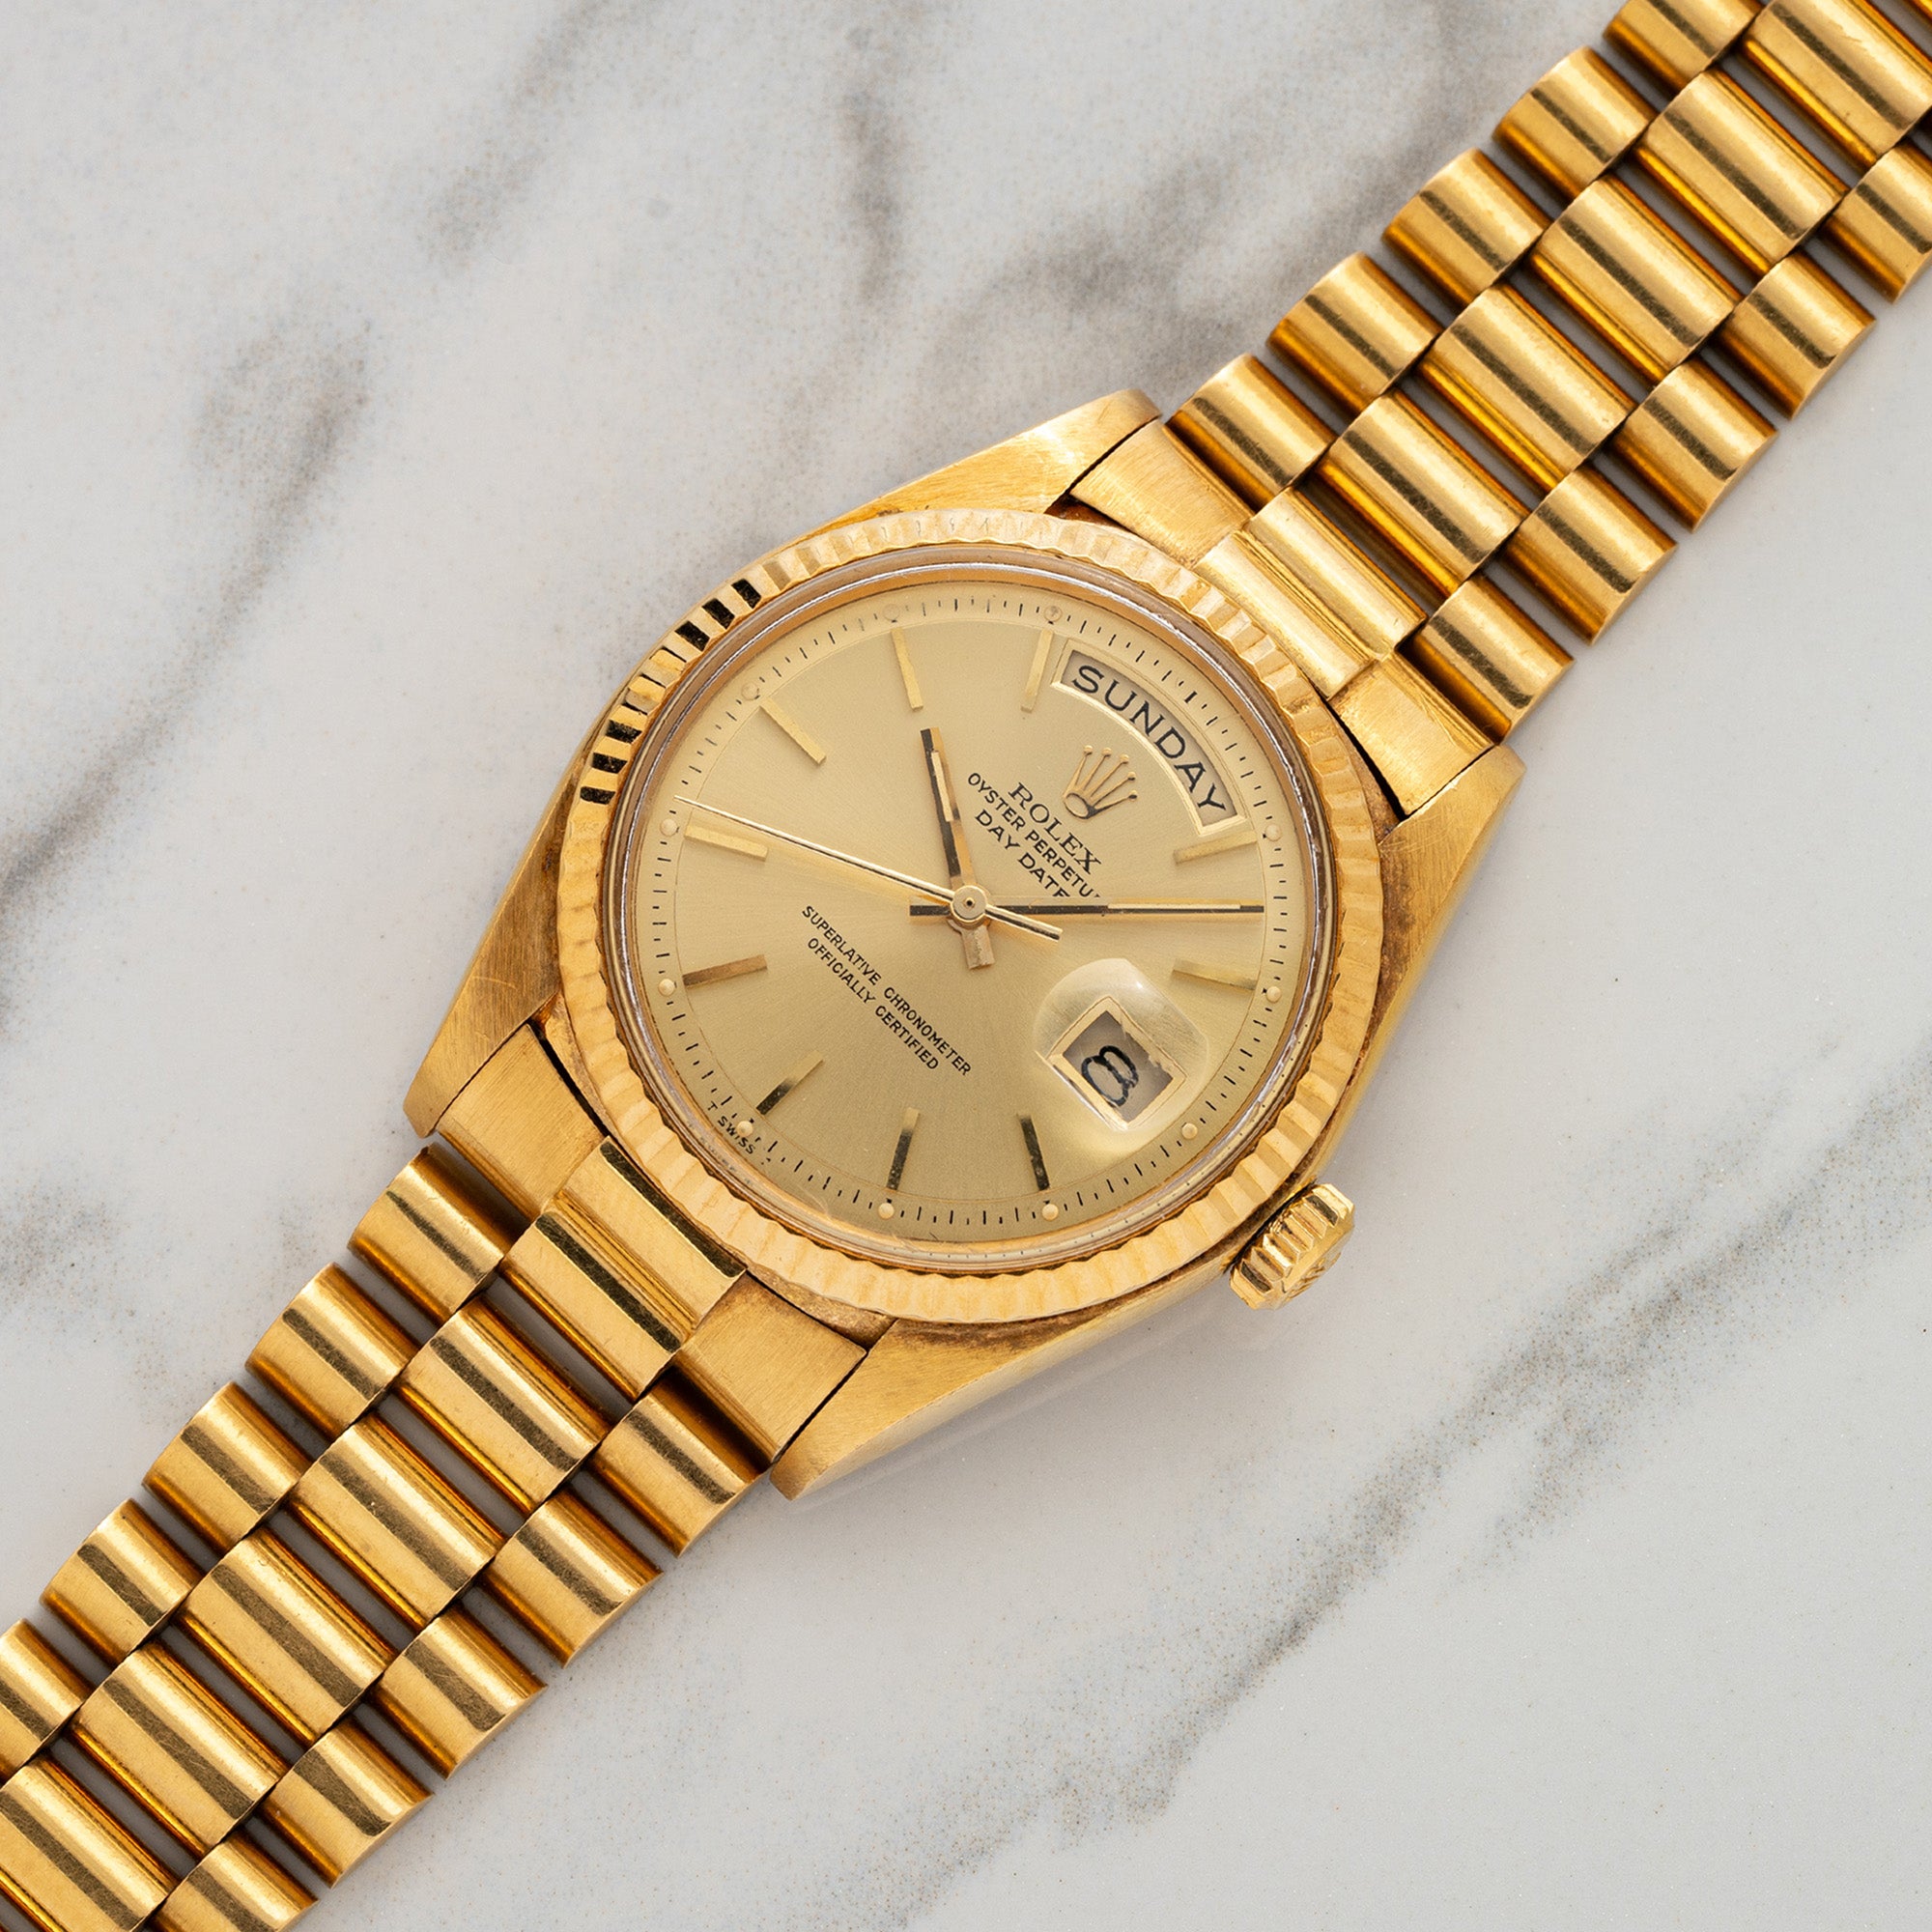 Rolex Day-Date 1803 - w/Gold "Champagne" Dial - PENDING